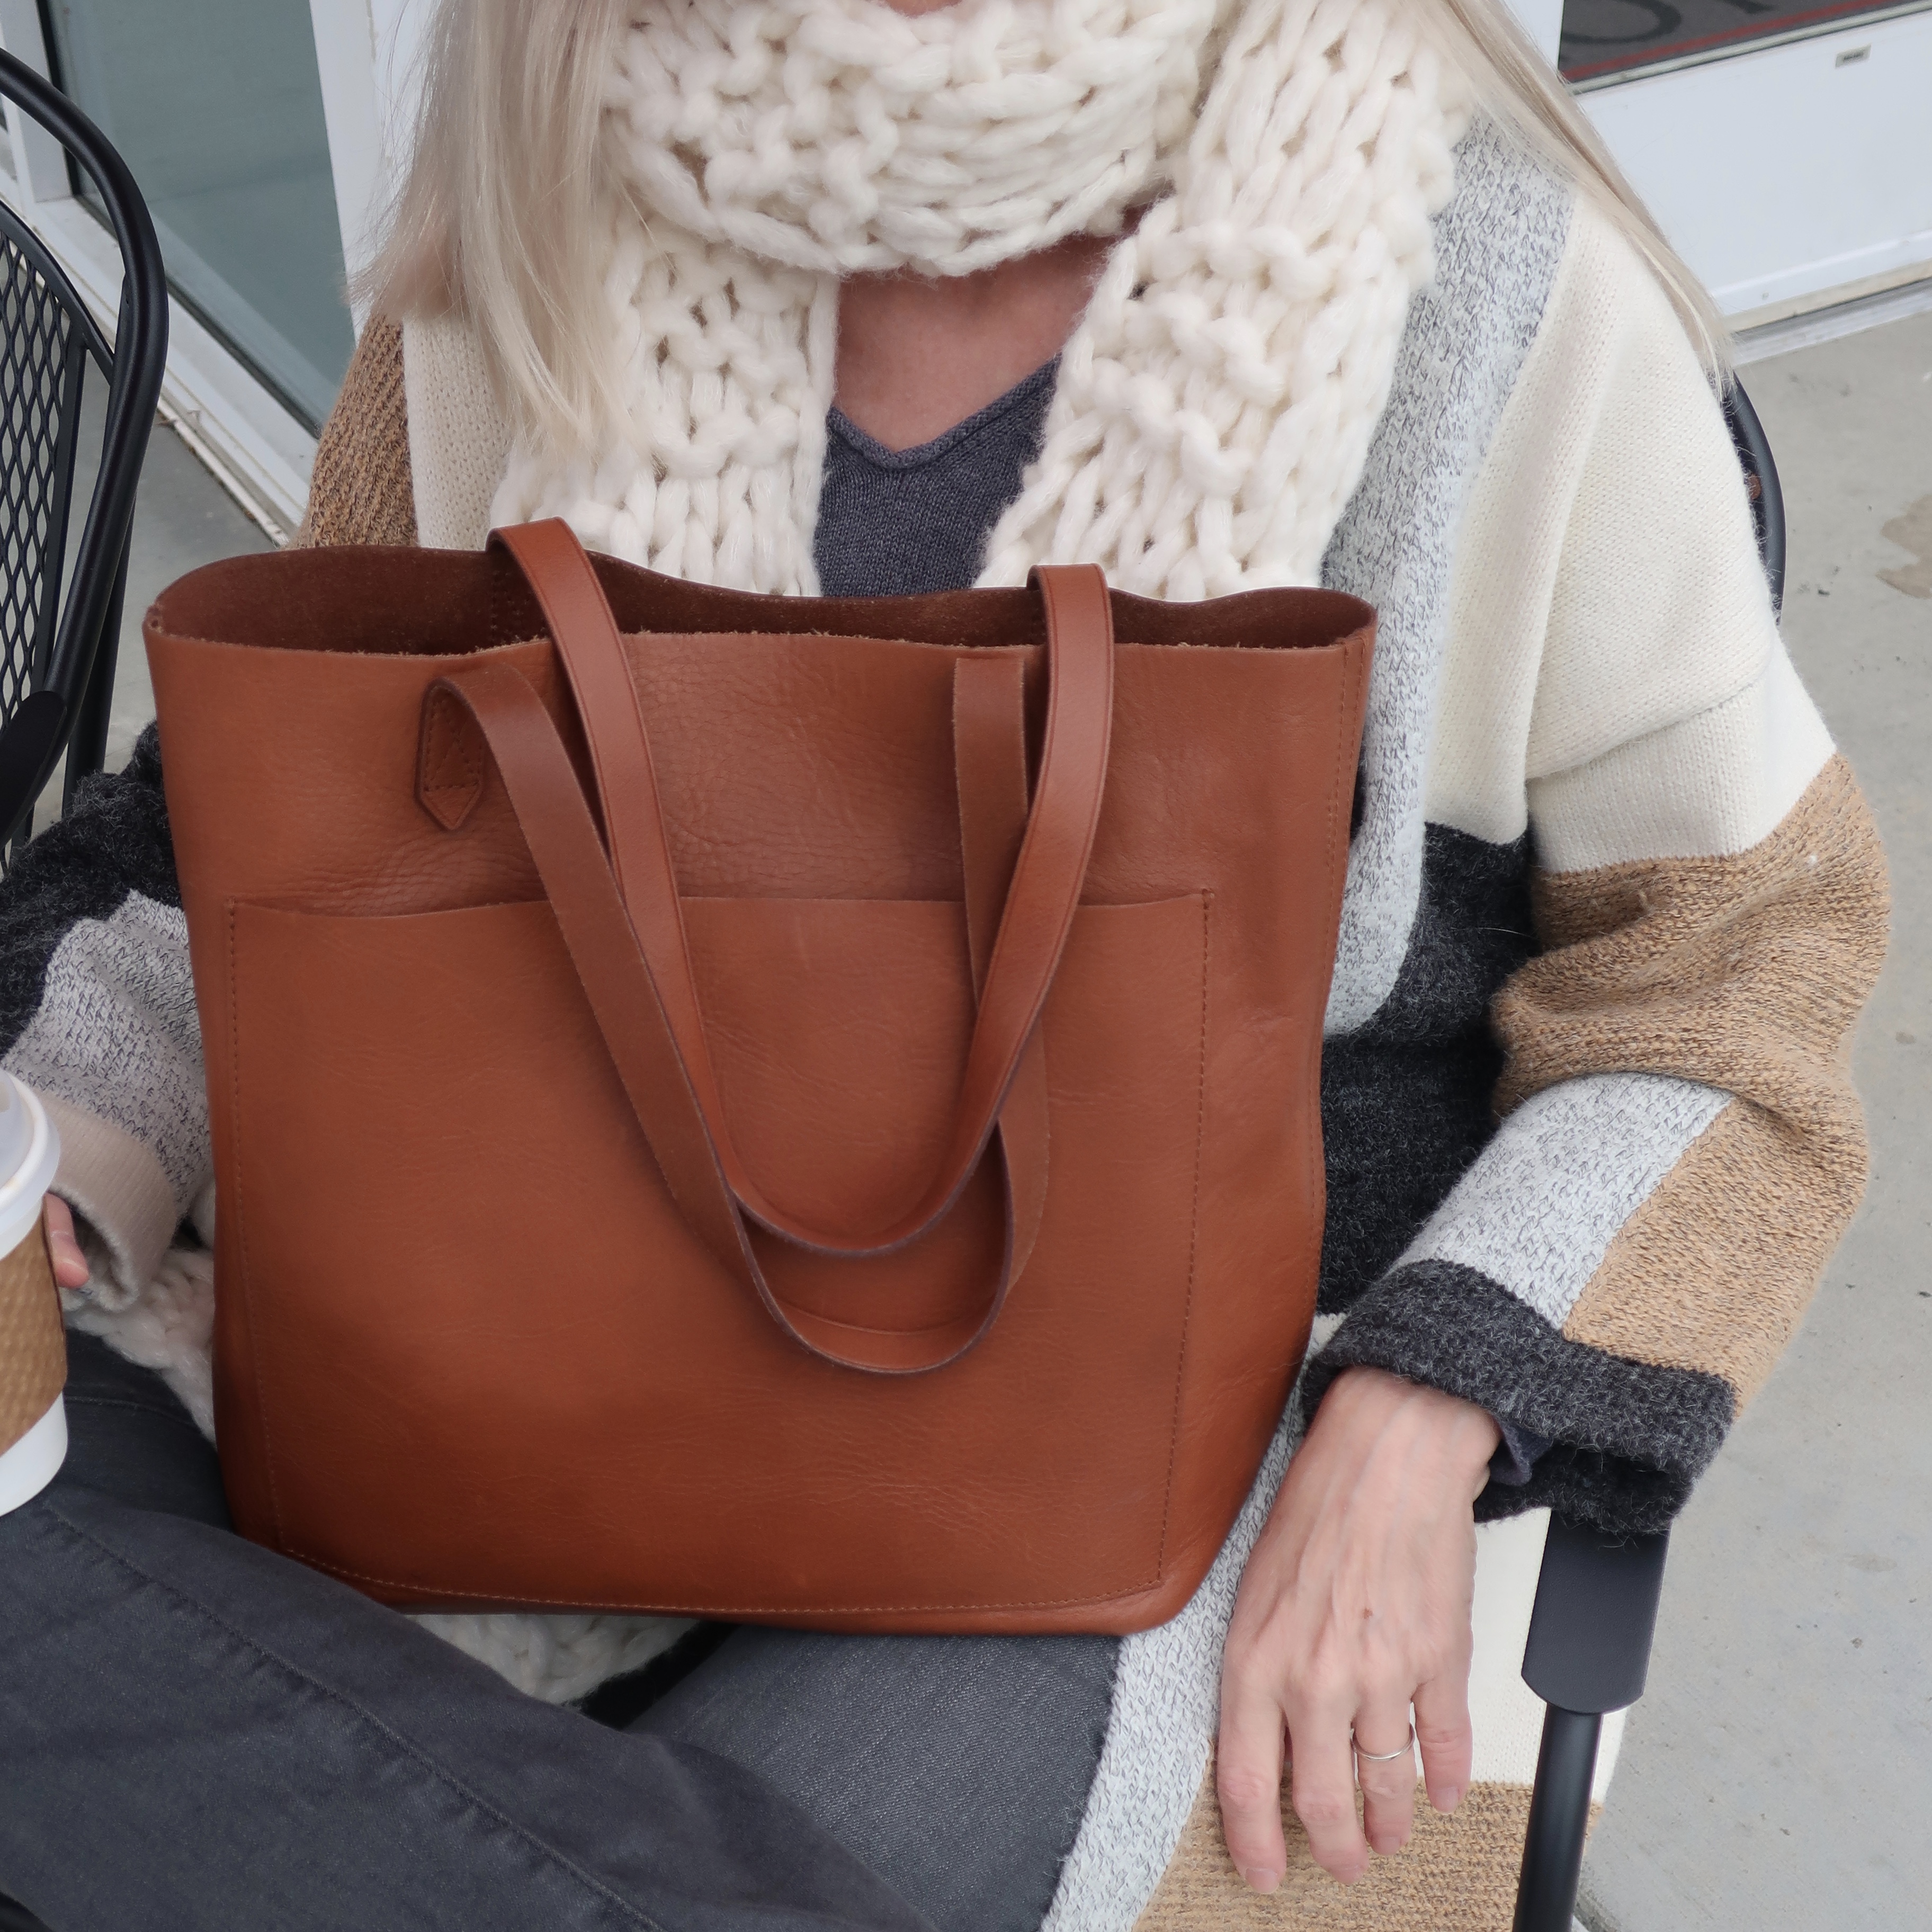 Eileen Fisher Scarf & MAdewell Transport tote